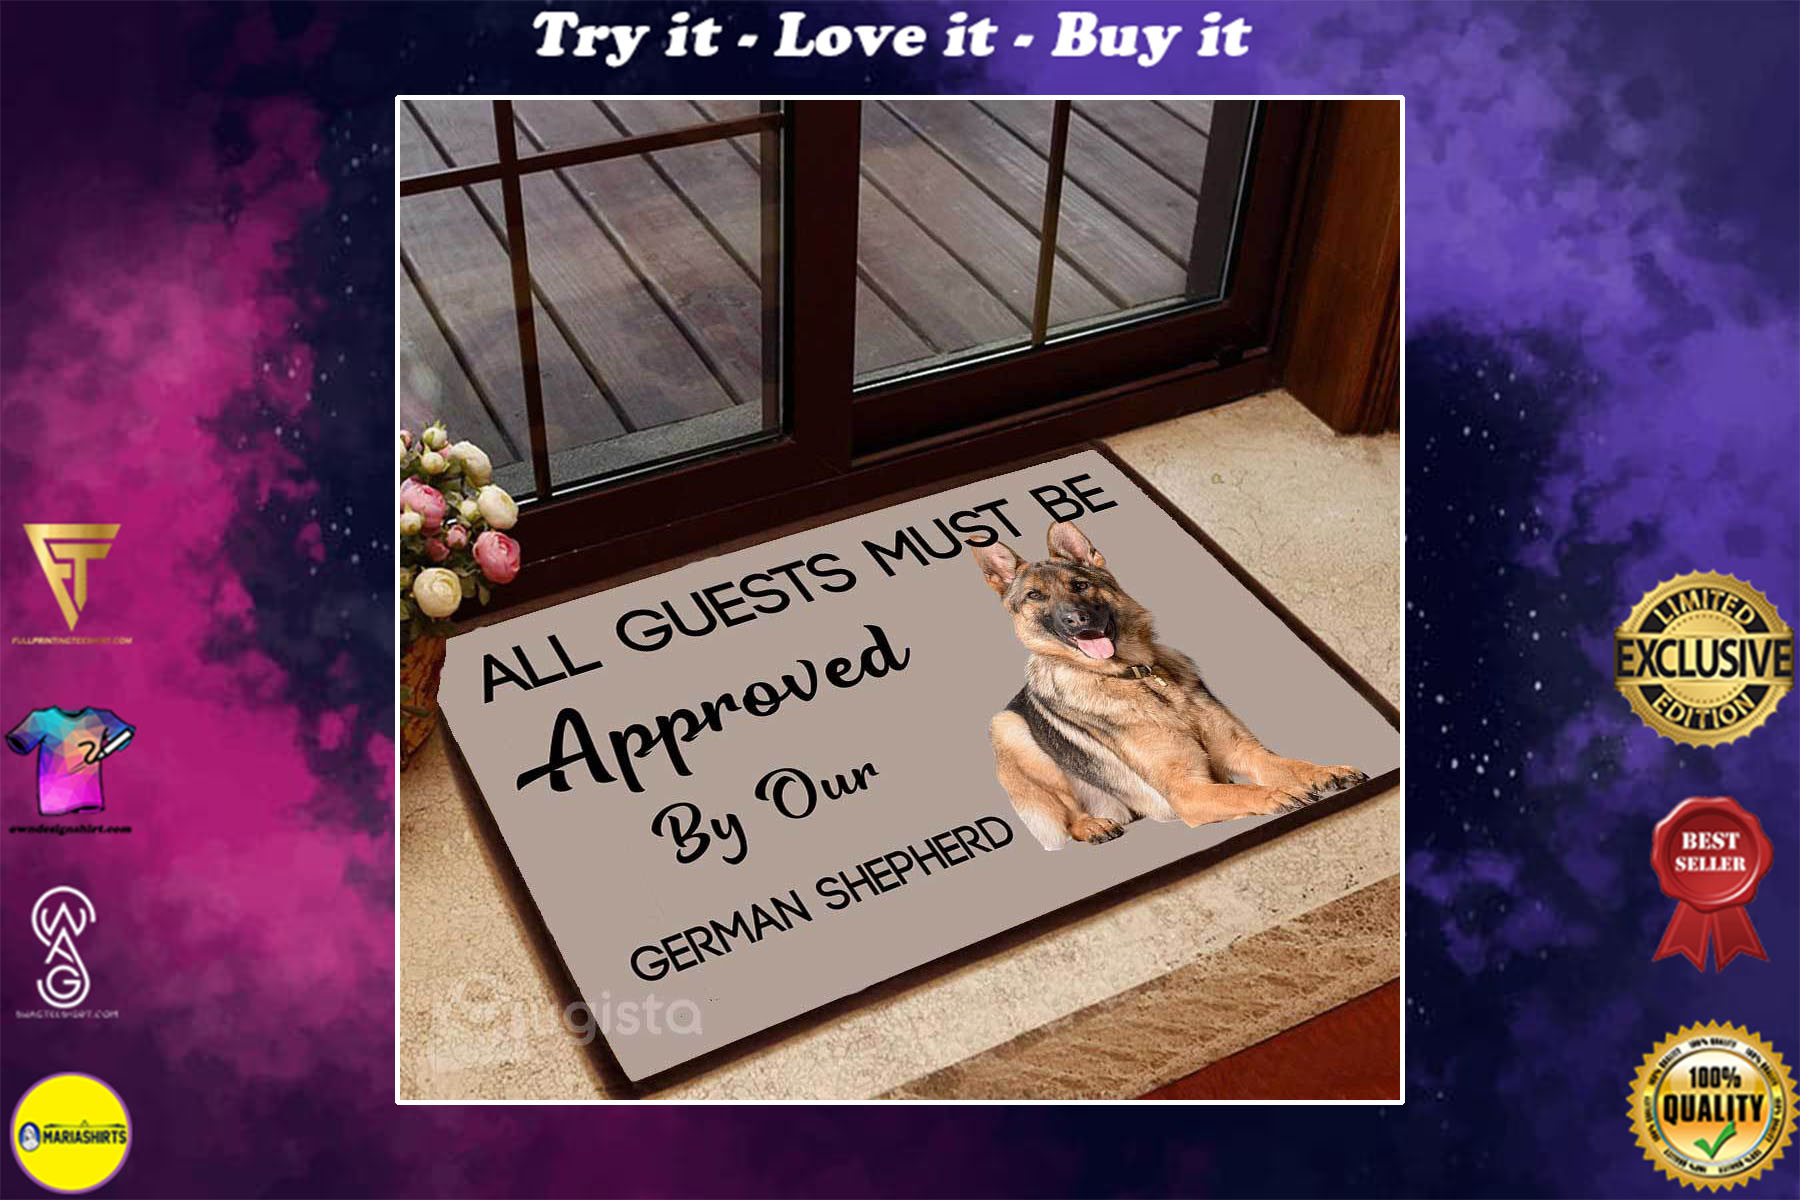 [special edition] all guests must be approved by our german shepherd lying down doormat – maria